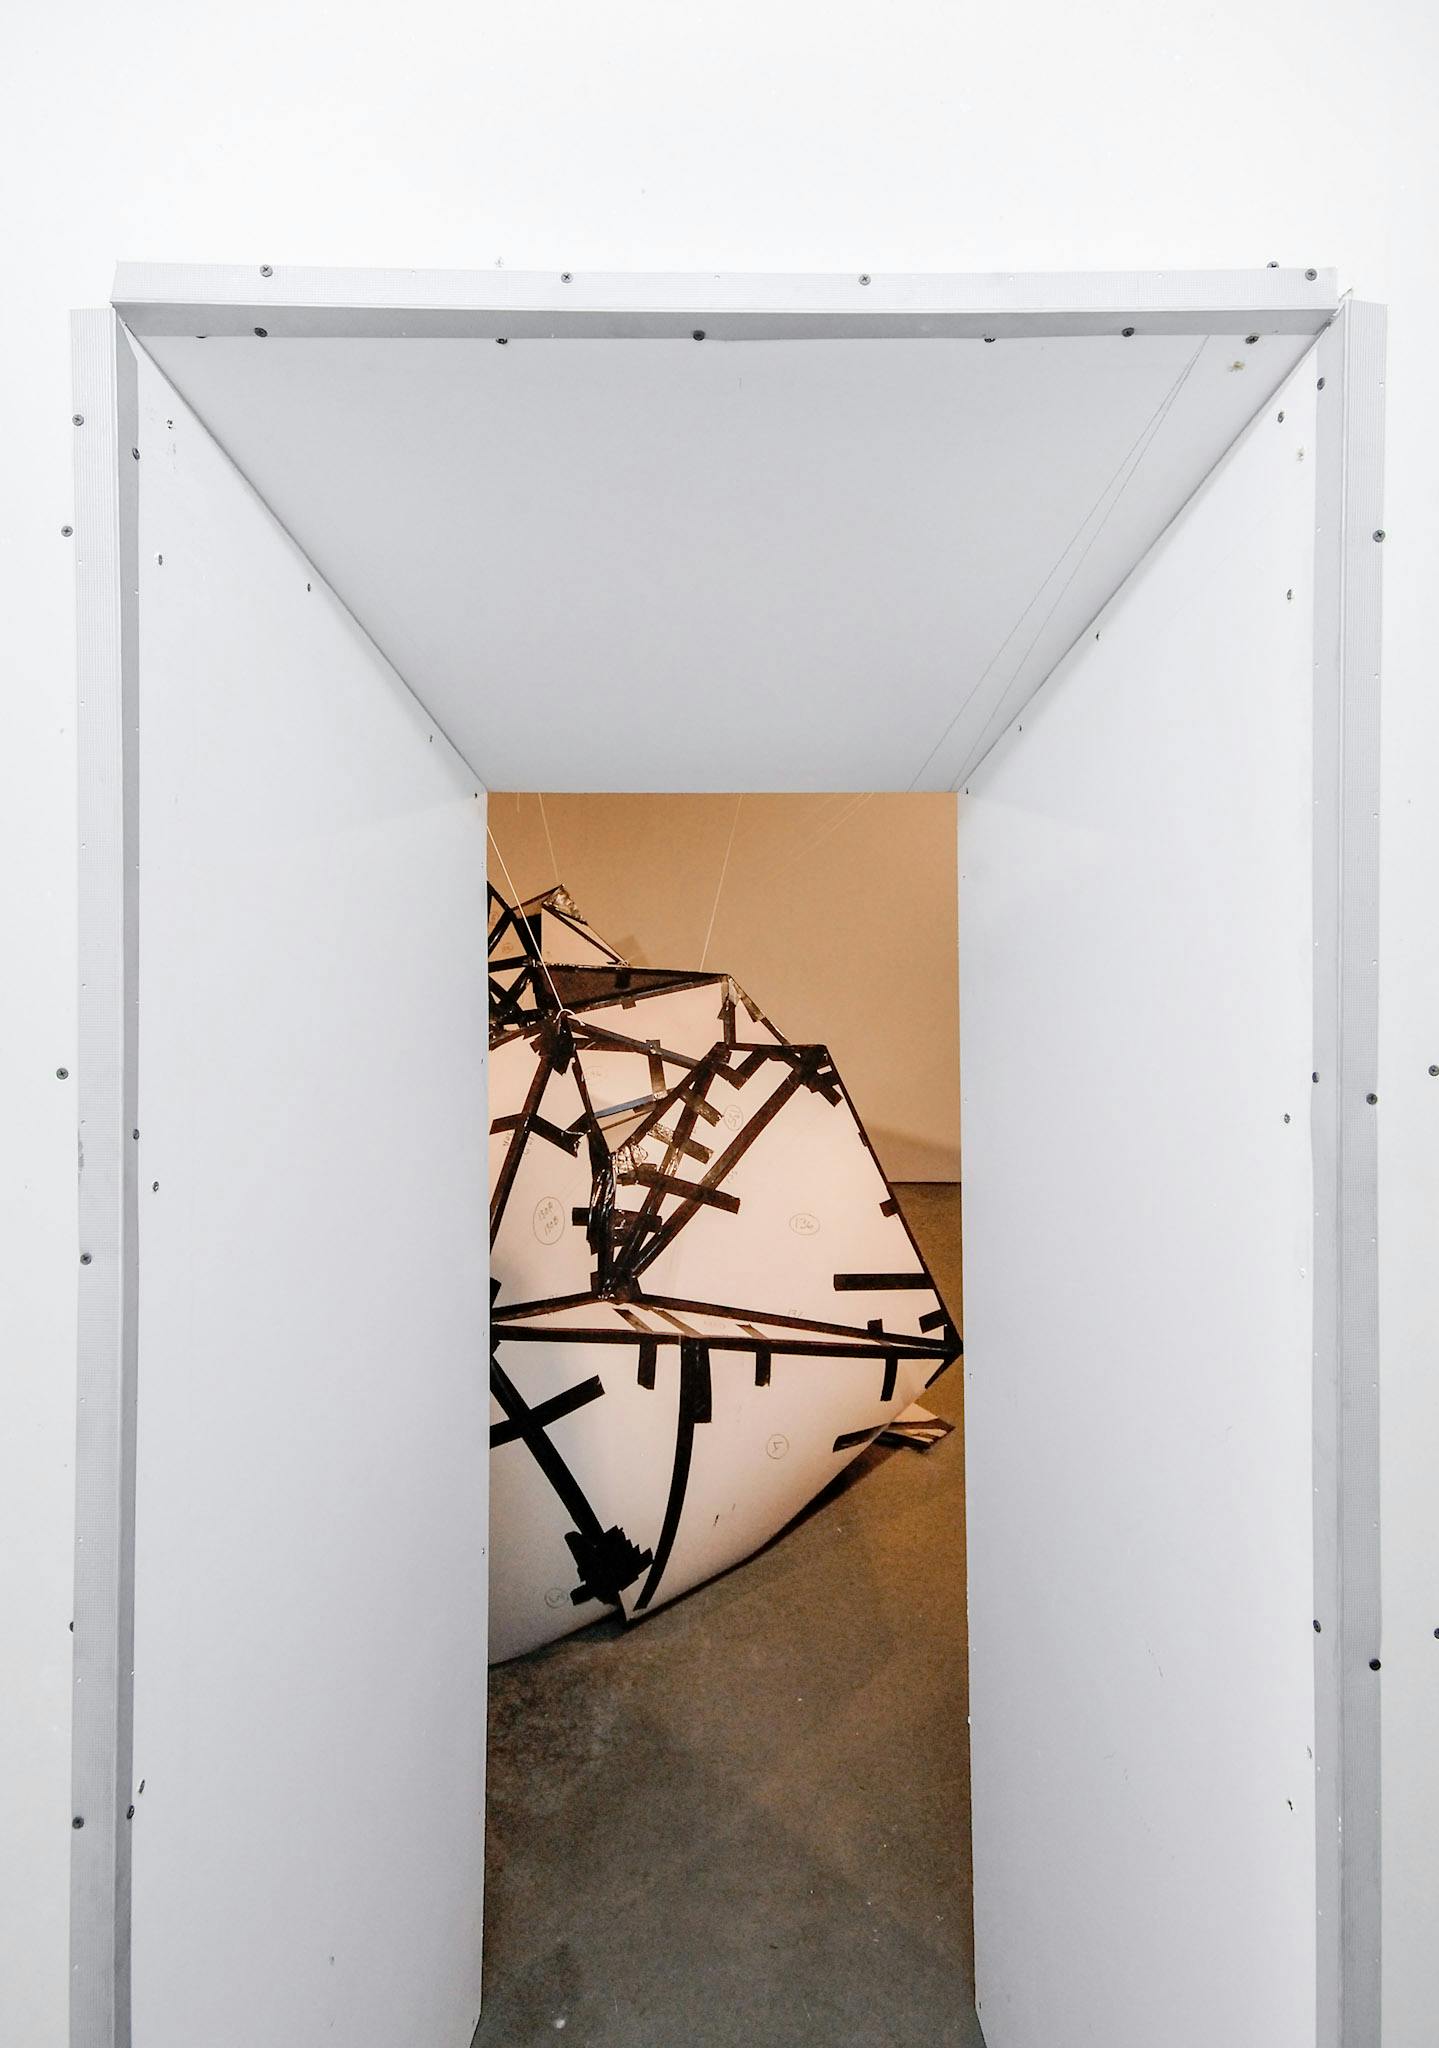 This is an entrance to a gallery space, which is narrowed by white panels attached above the gallery entrance. A large-sized white sculpture is partially visible through the entrance. 